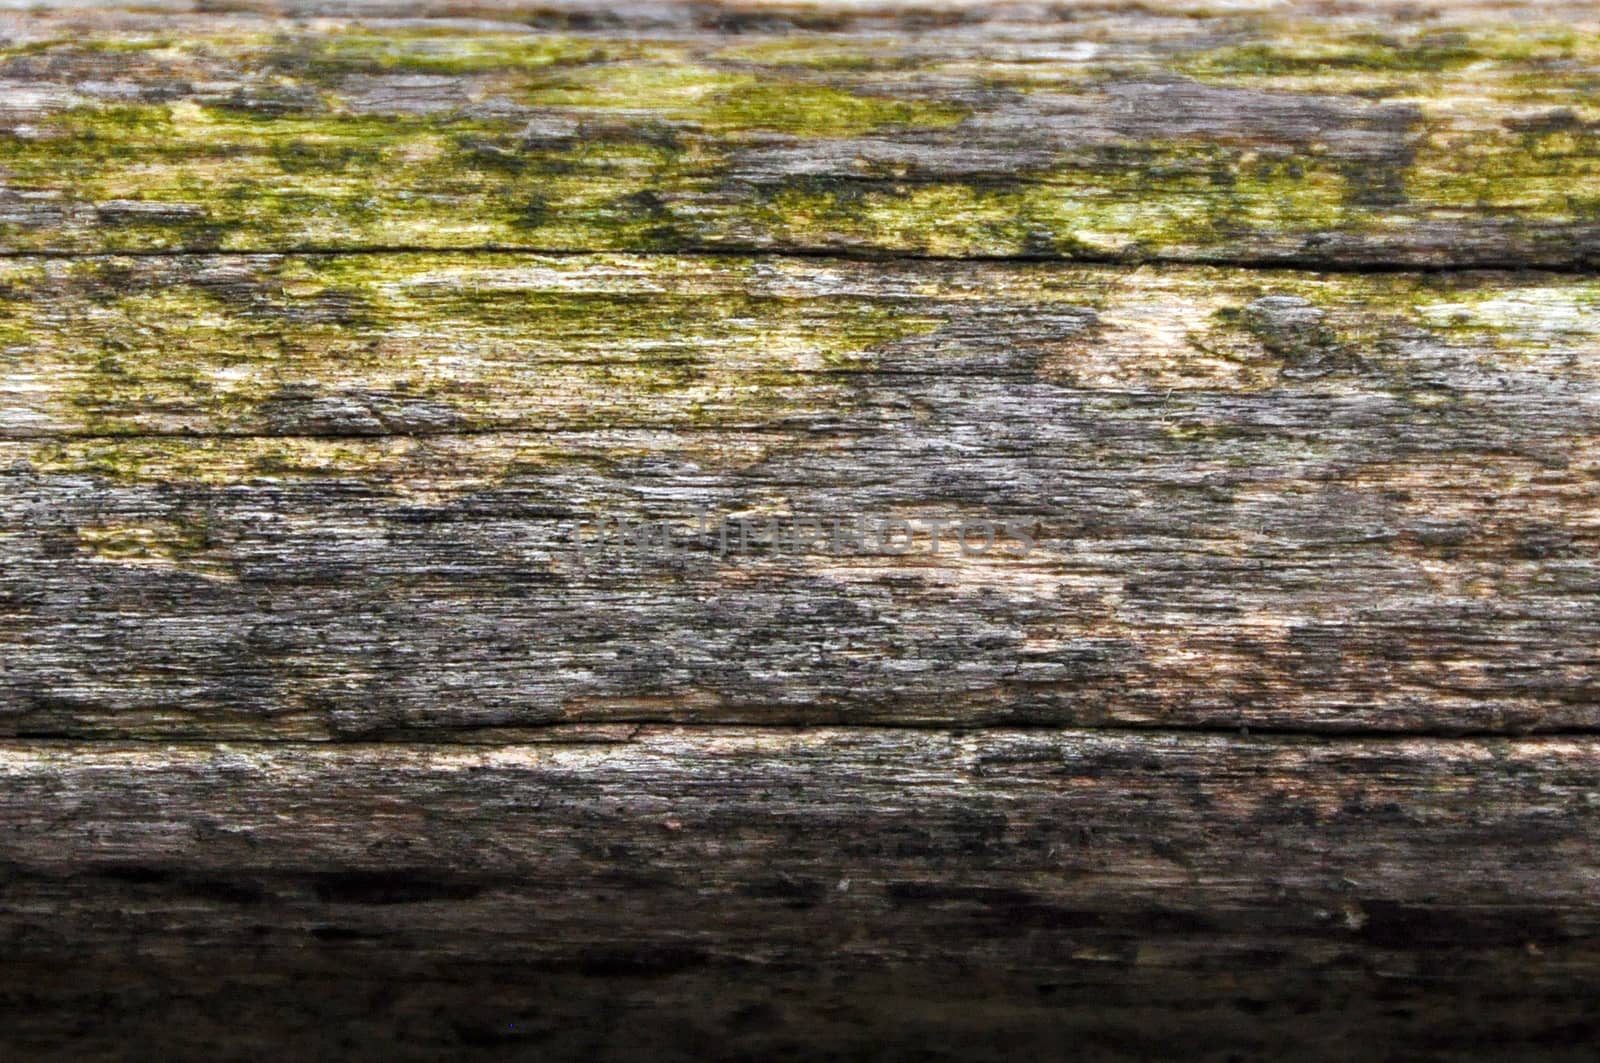 rough texture of bark and old wood with moss and the light of sun